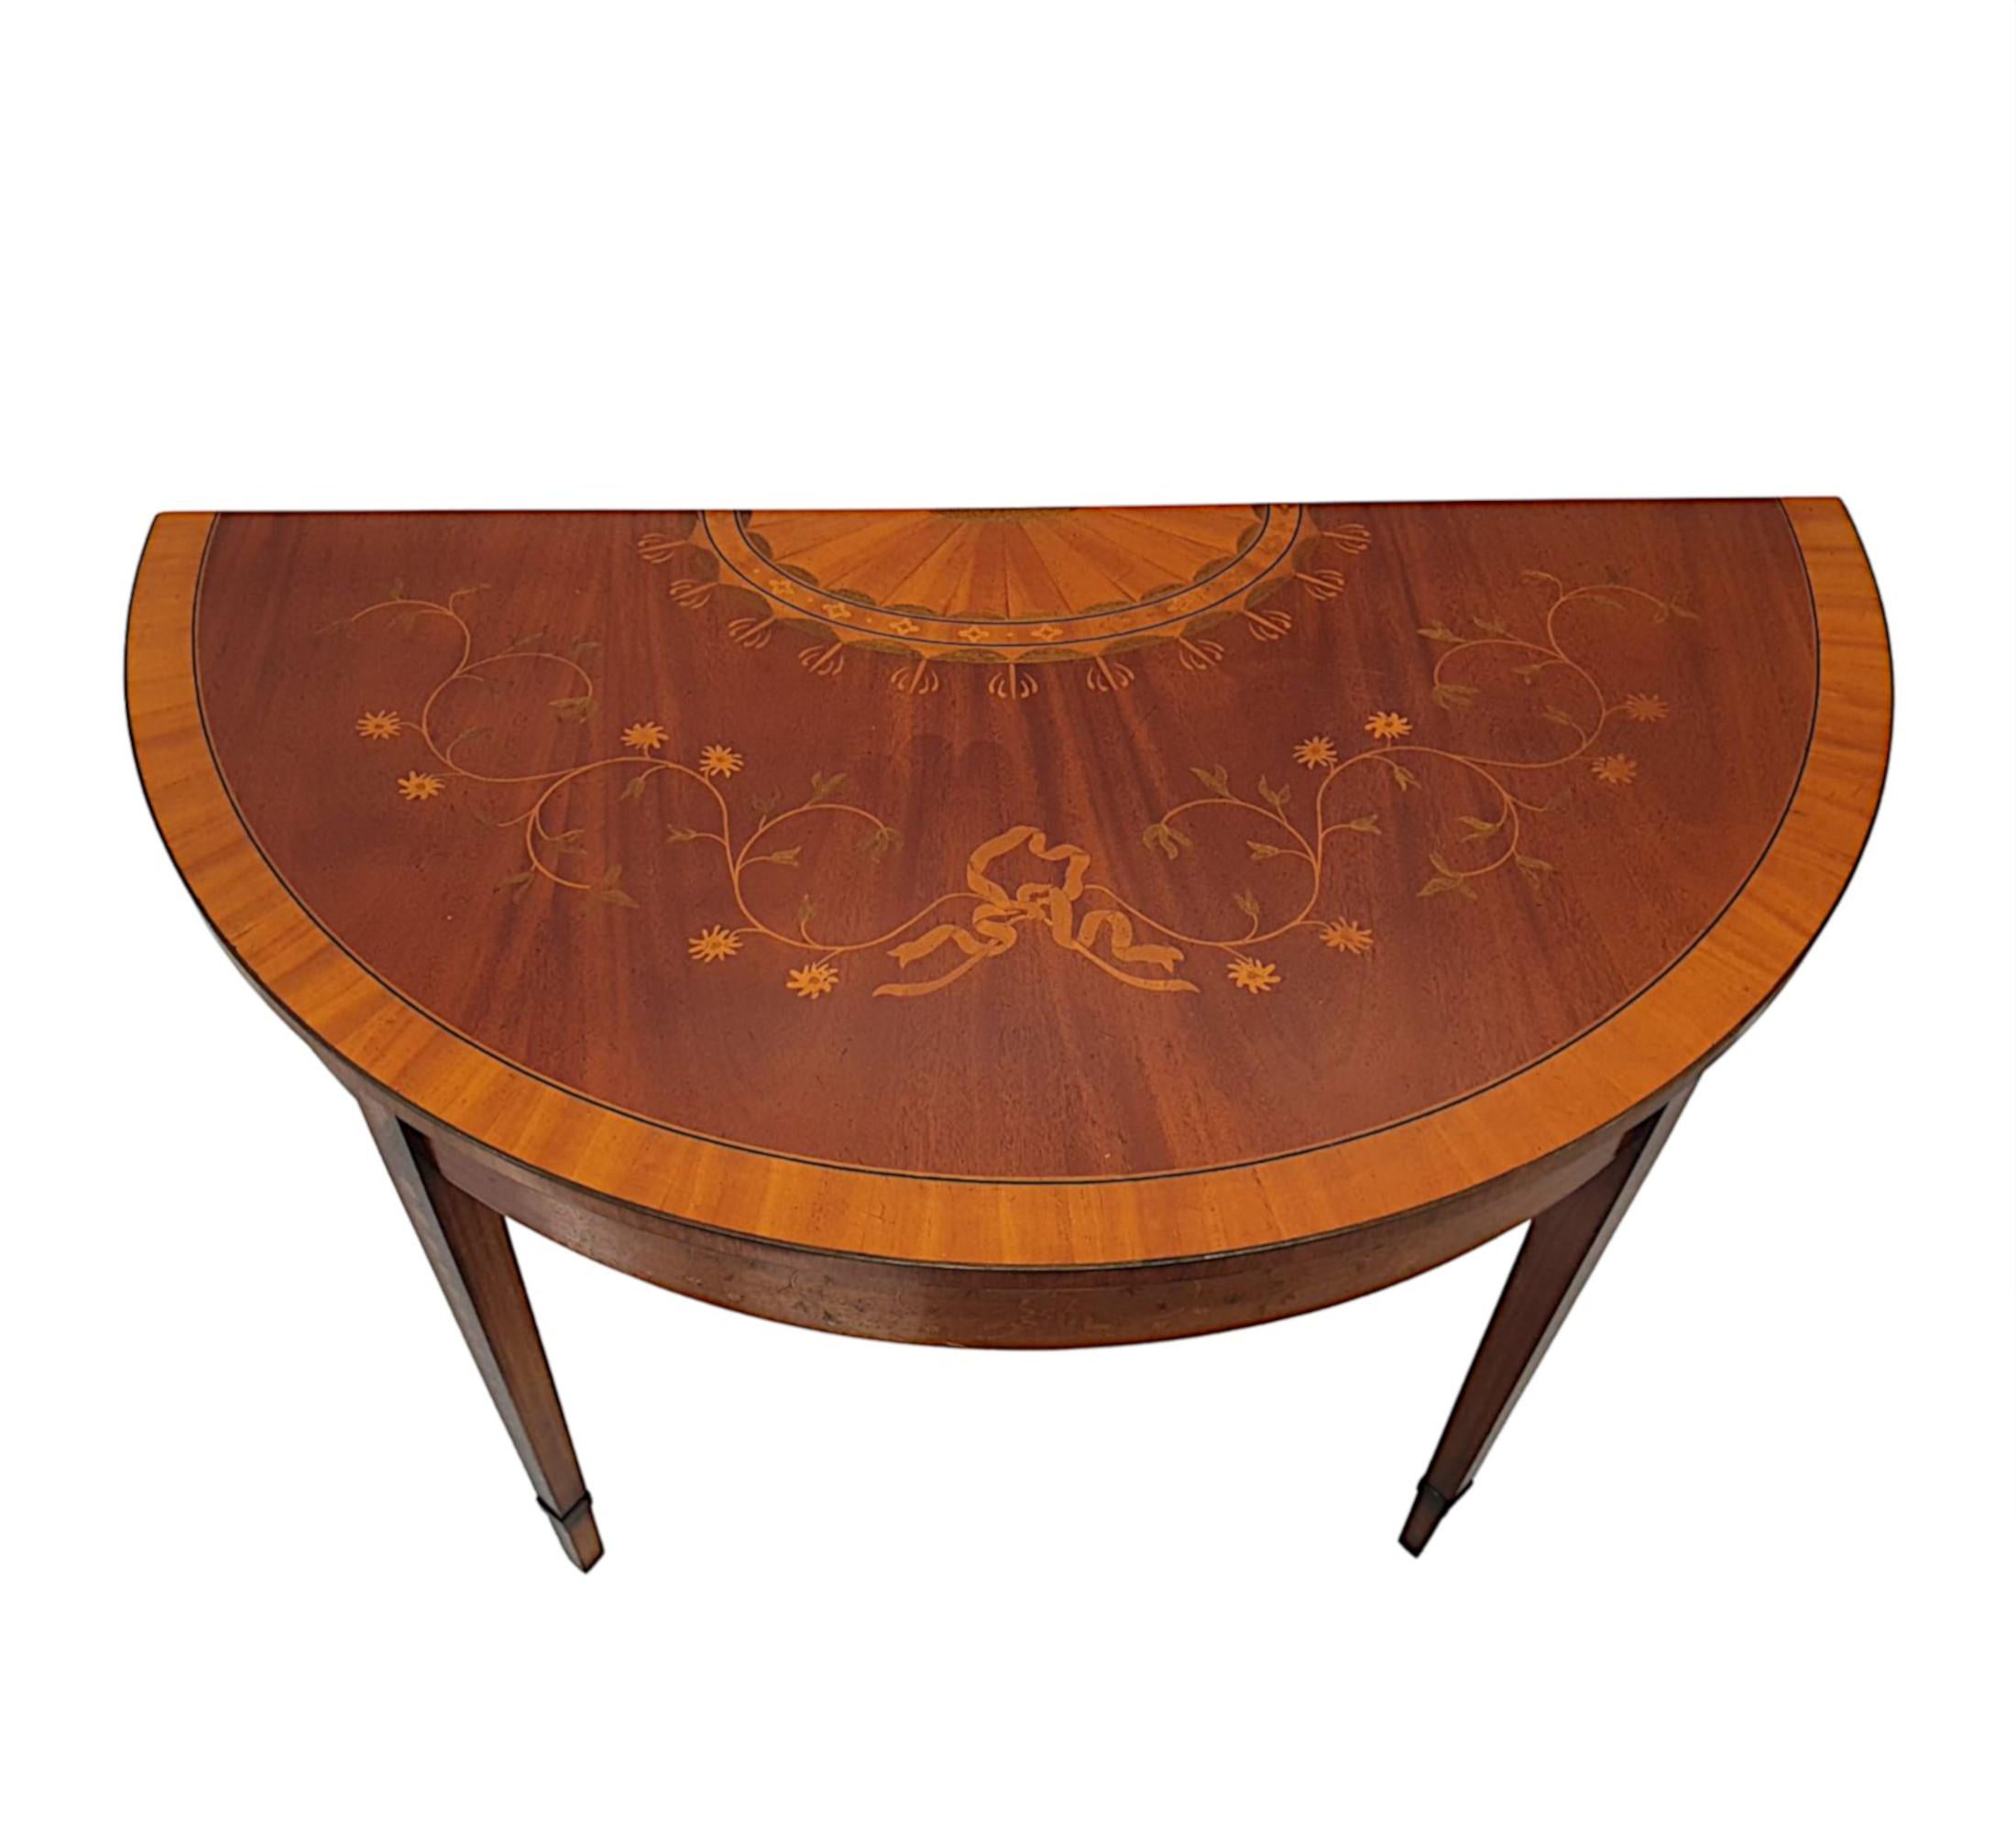 A fabulous quality mid-20th century hand-made mahogany demi-lune table. The cross banded and line inlaid moulded top with intricate marquetry inlay depicting an exquisite radiating fan accented with foliate motifs and a composition of centred ribbon